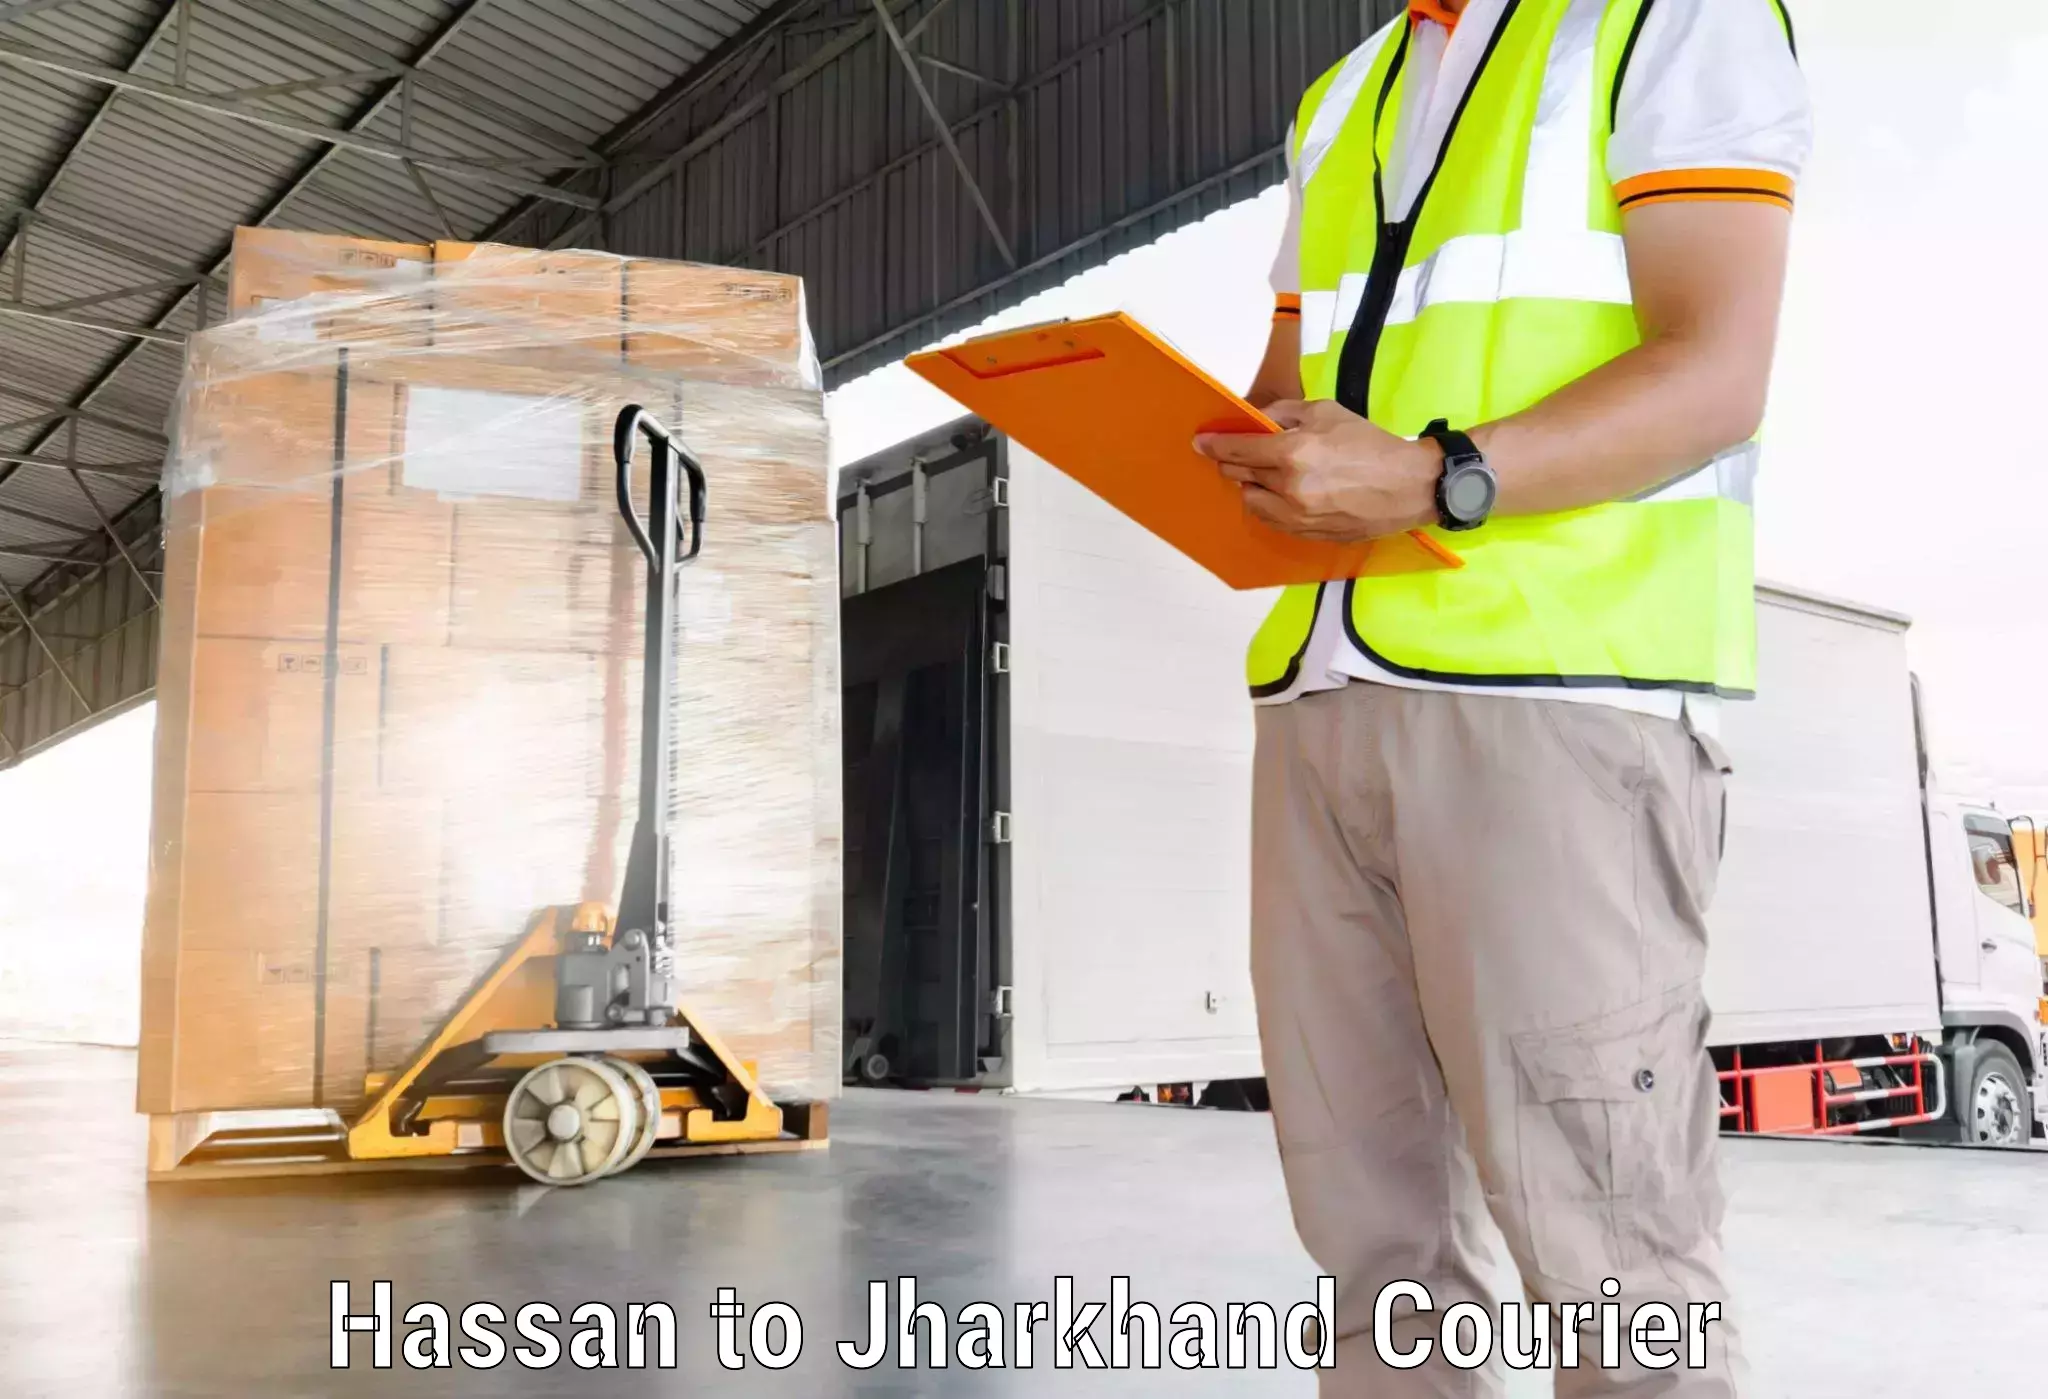 Reliable delivery network Hassan to Medininagar